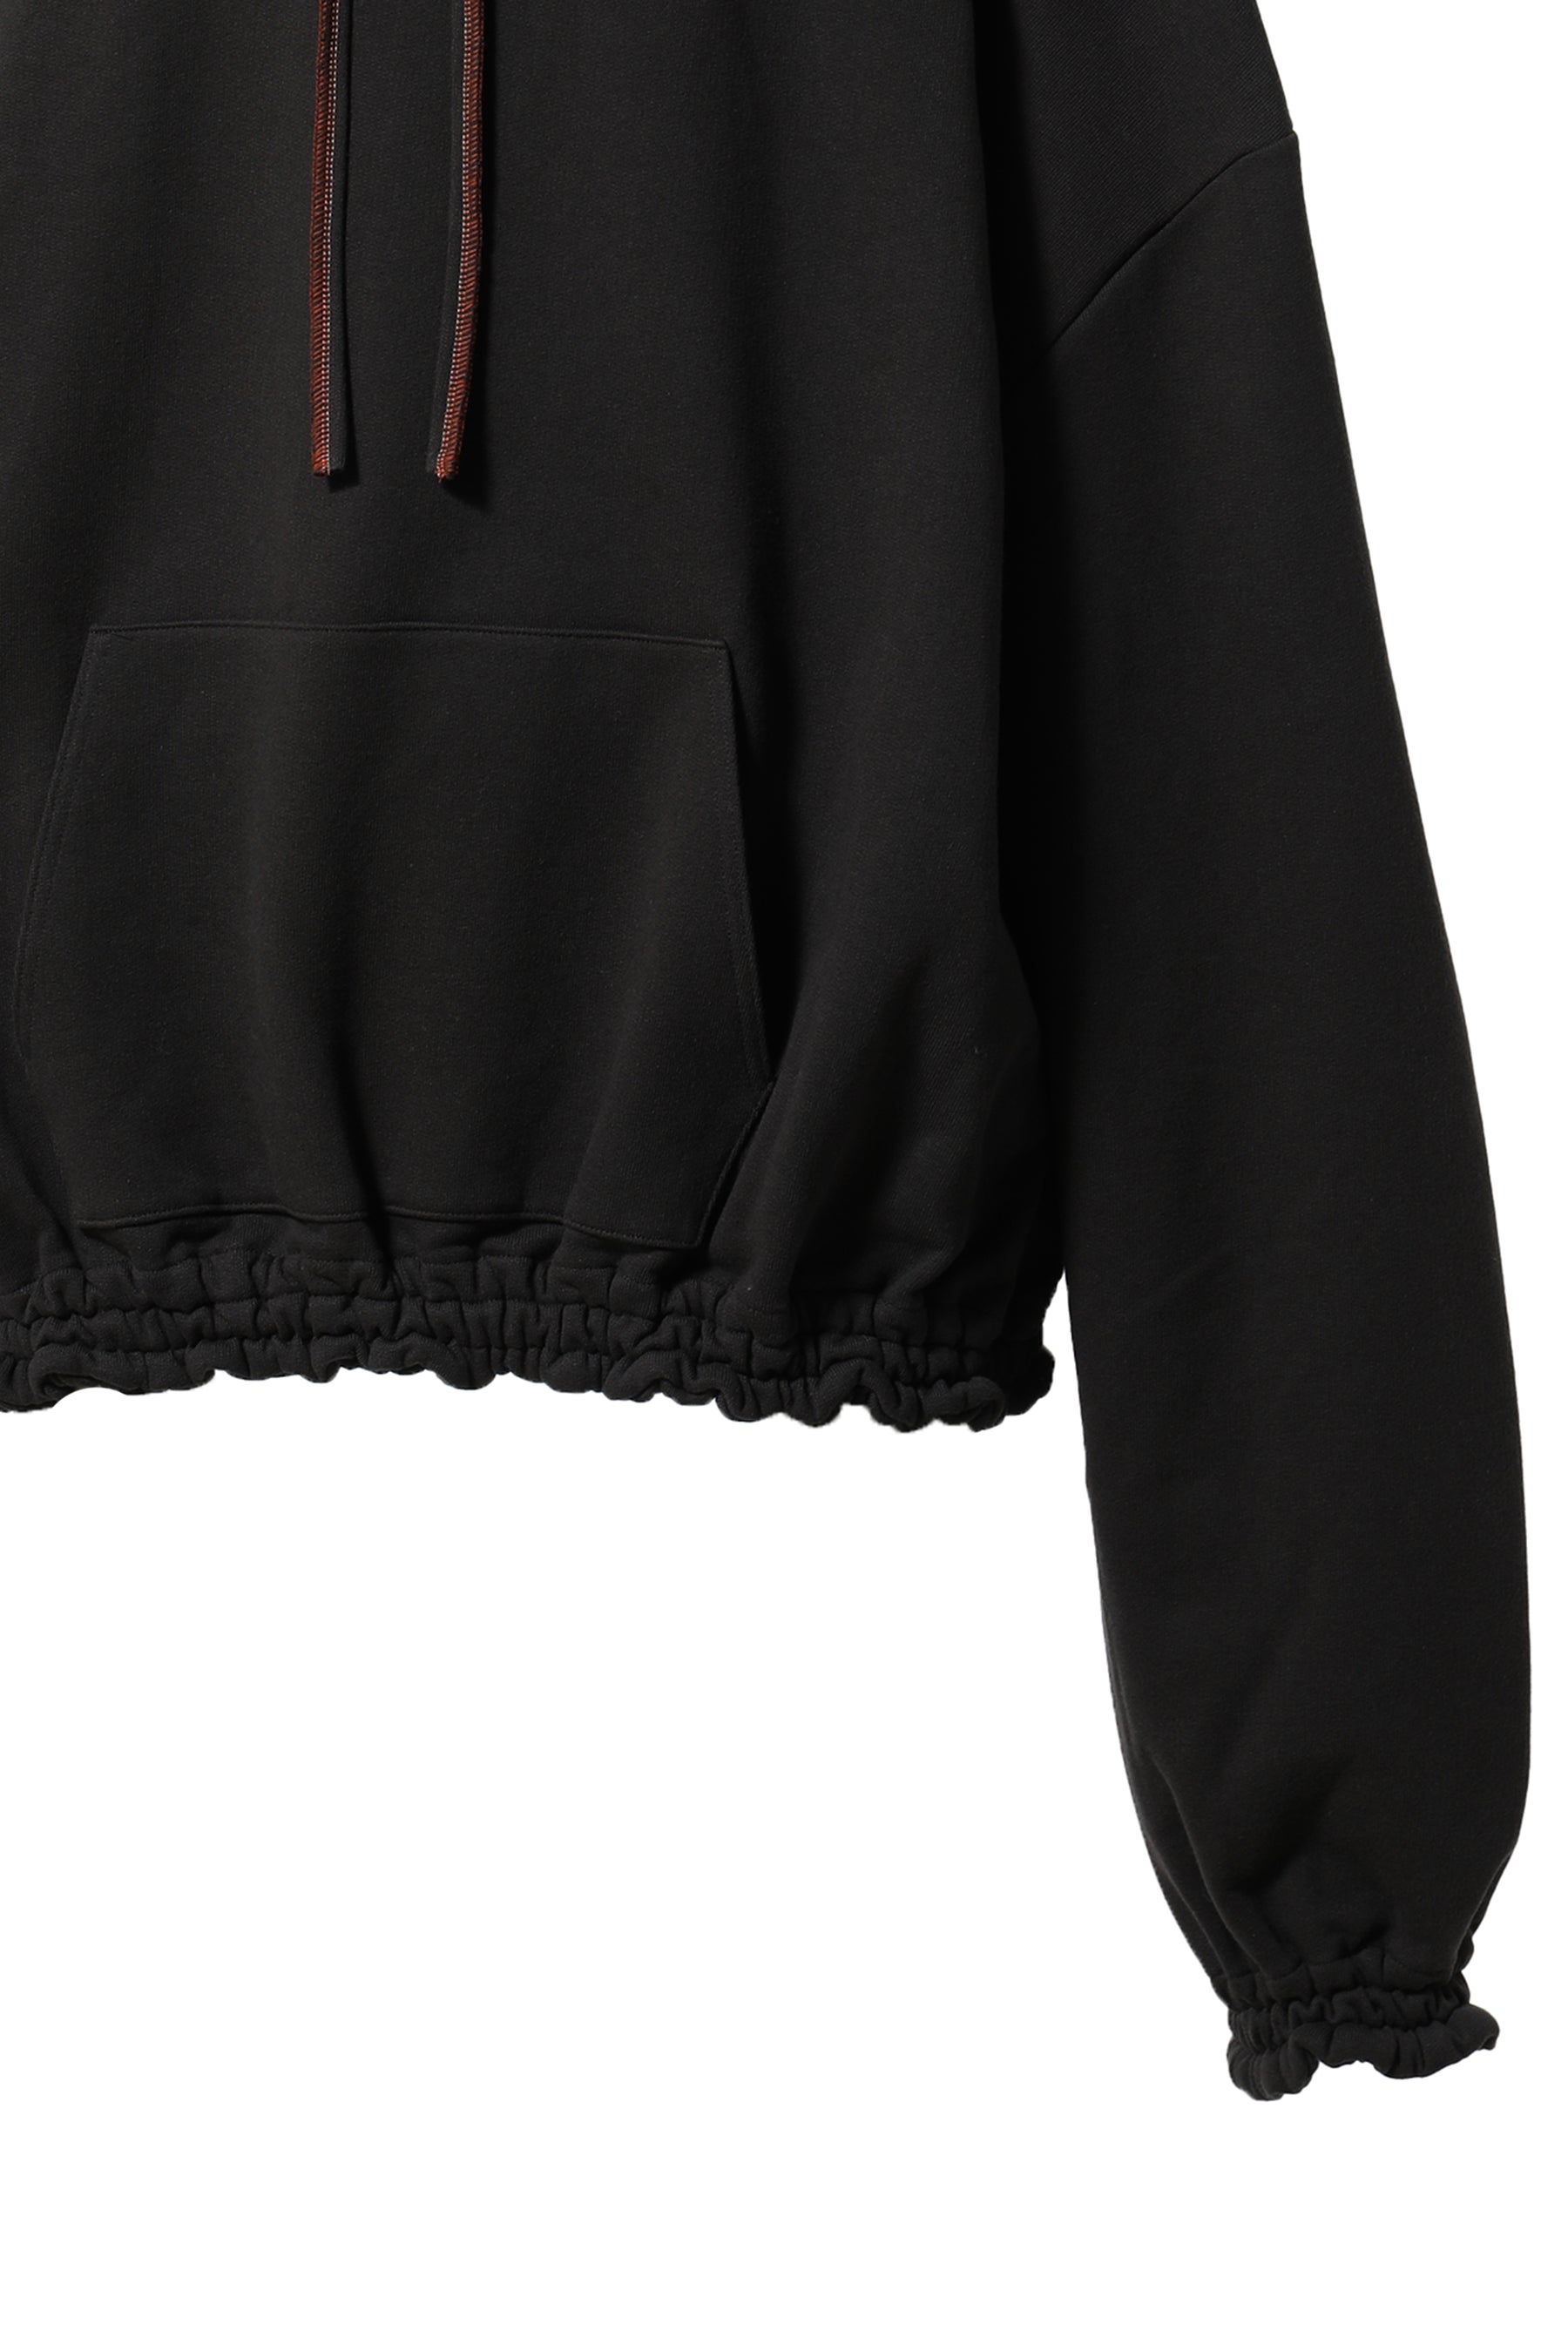 ORDINARY GIANT HOODIE / OFF BLK